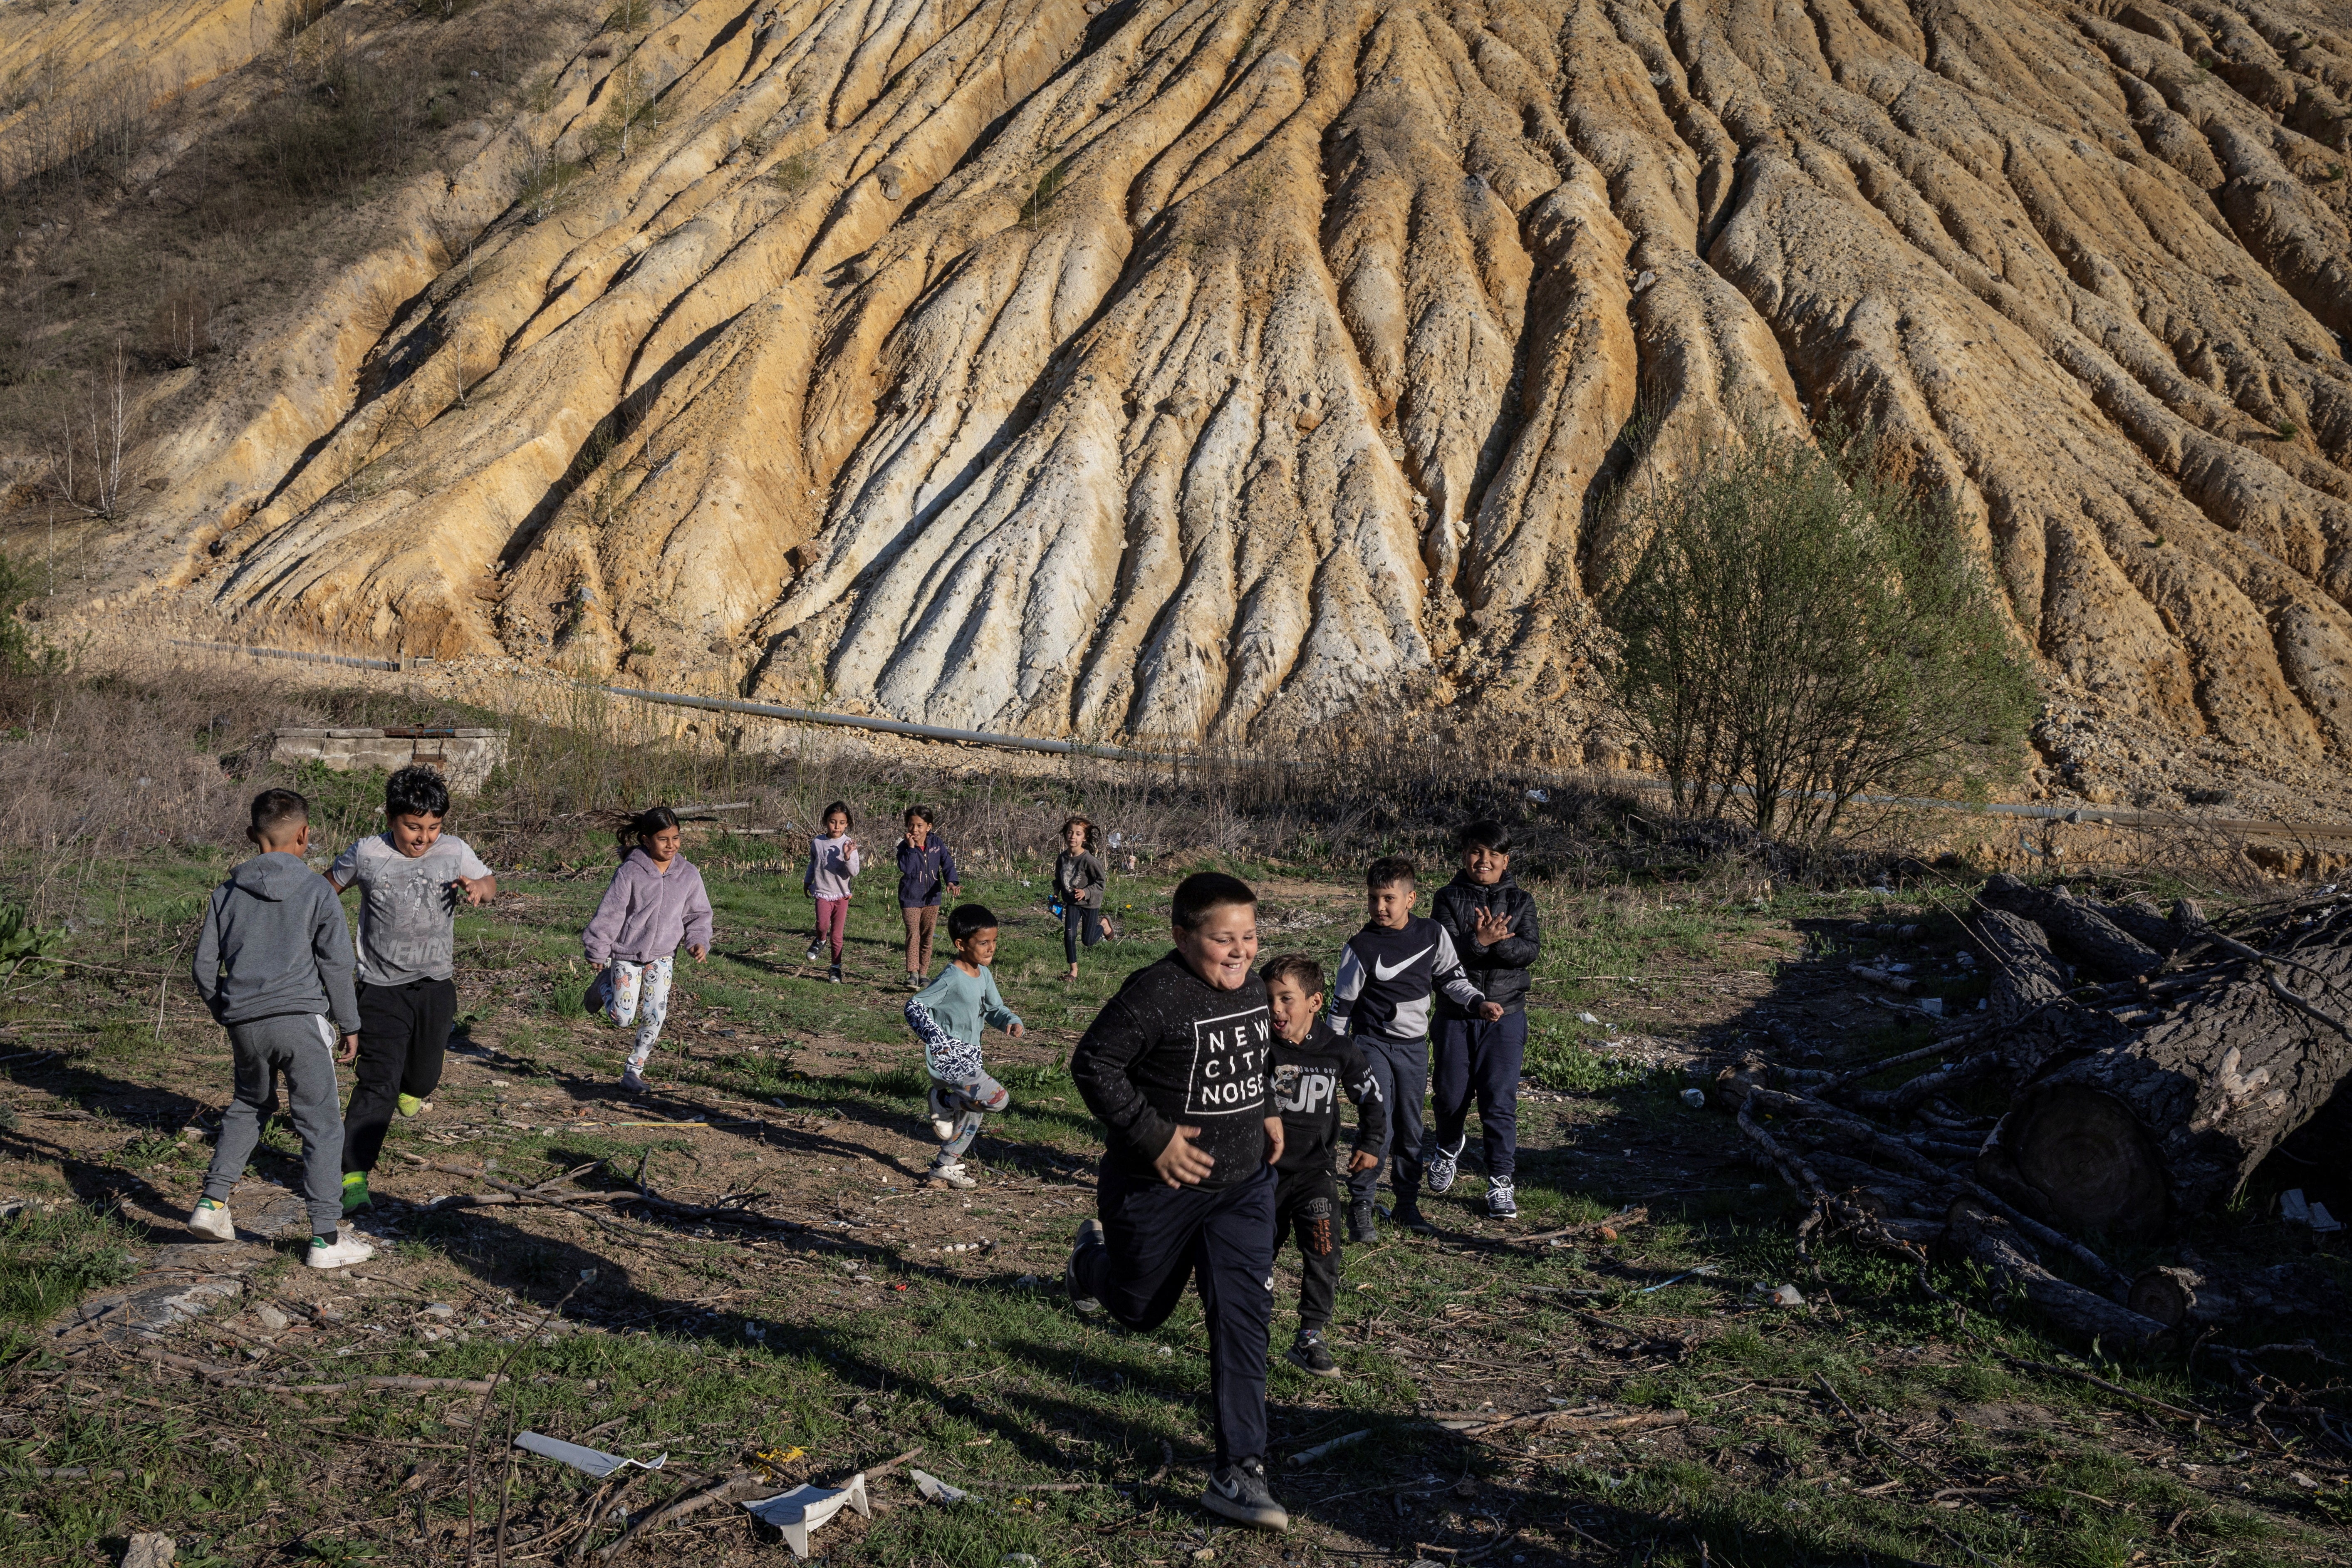 Children play in front of tailings at the Zmajevo settlement